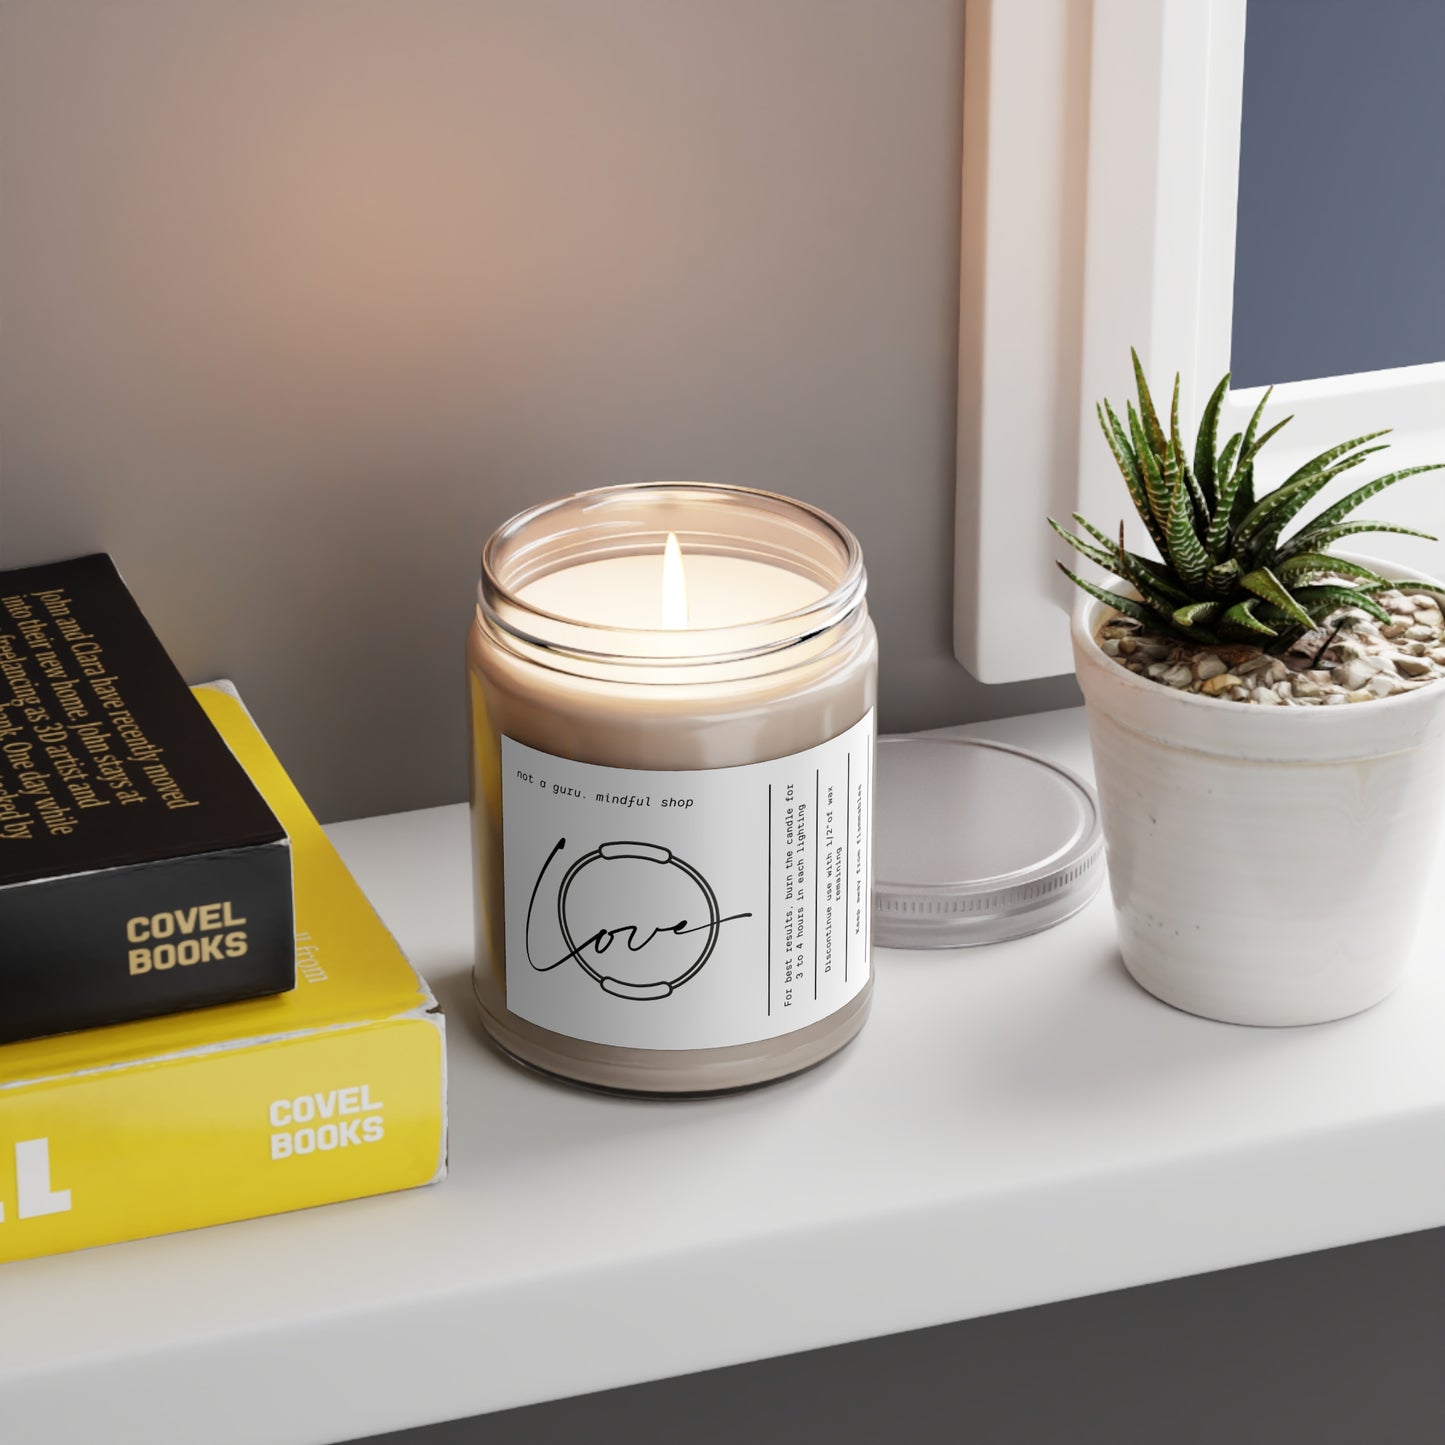 Love Pilates Scented Candles